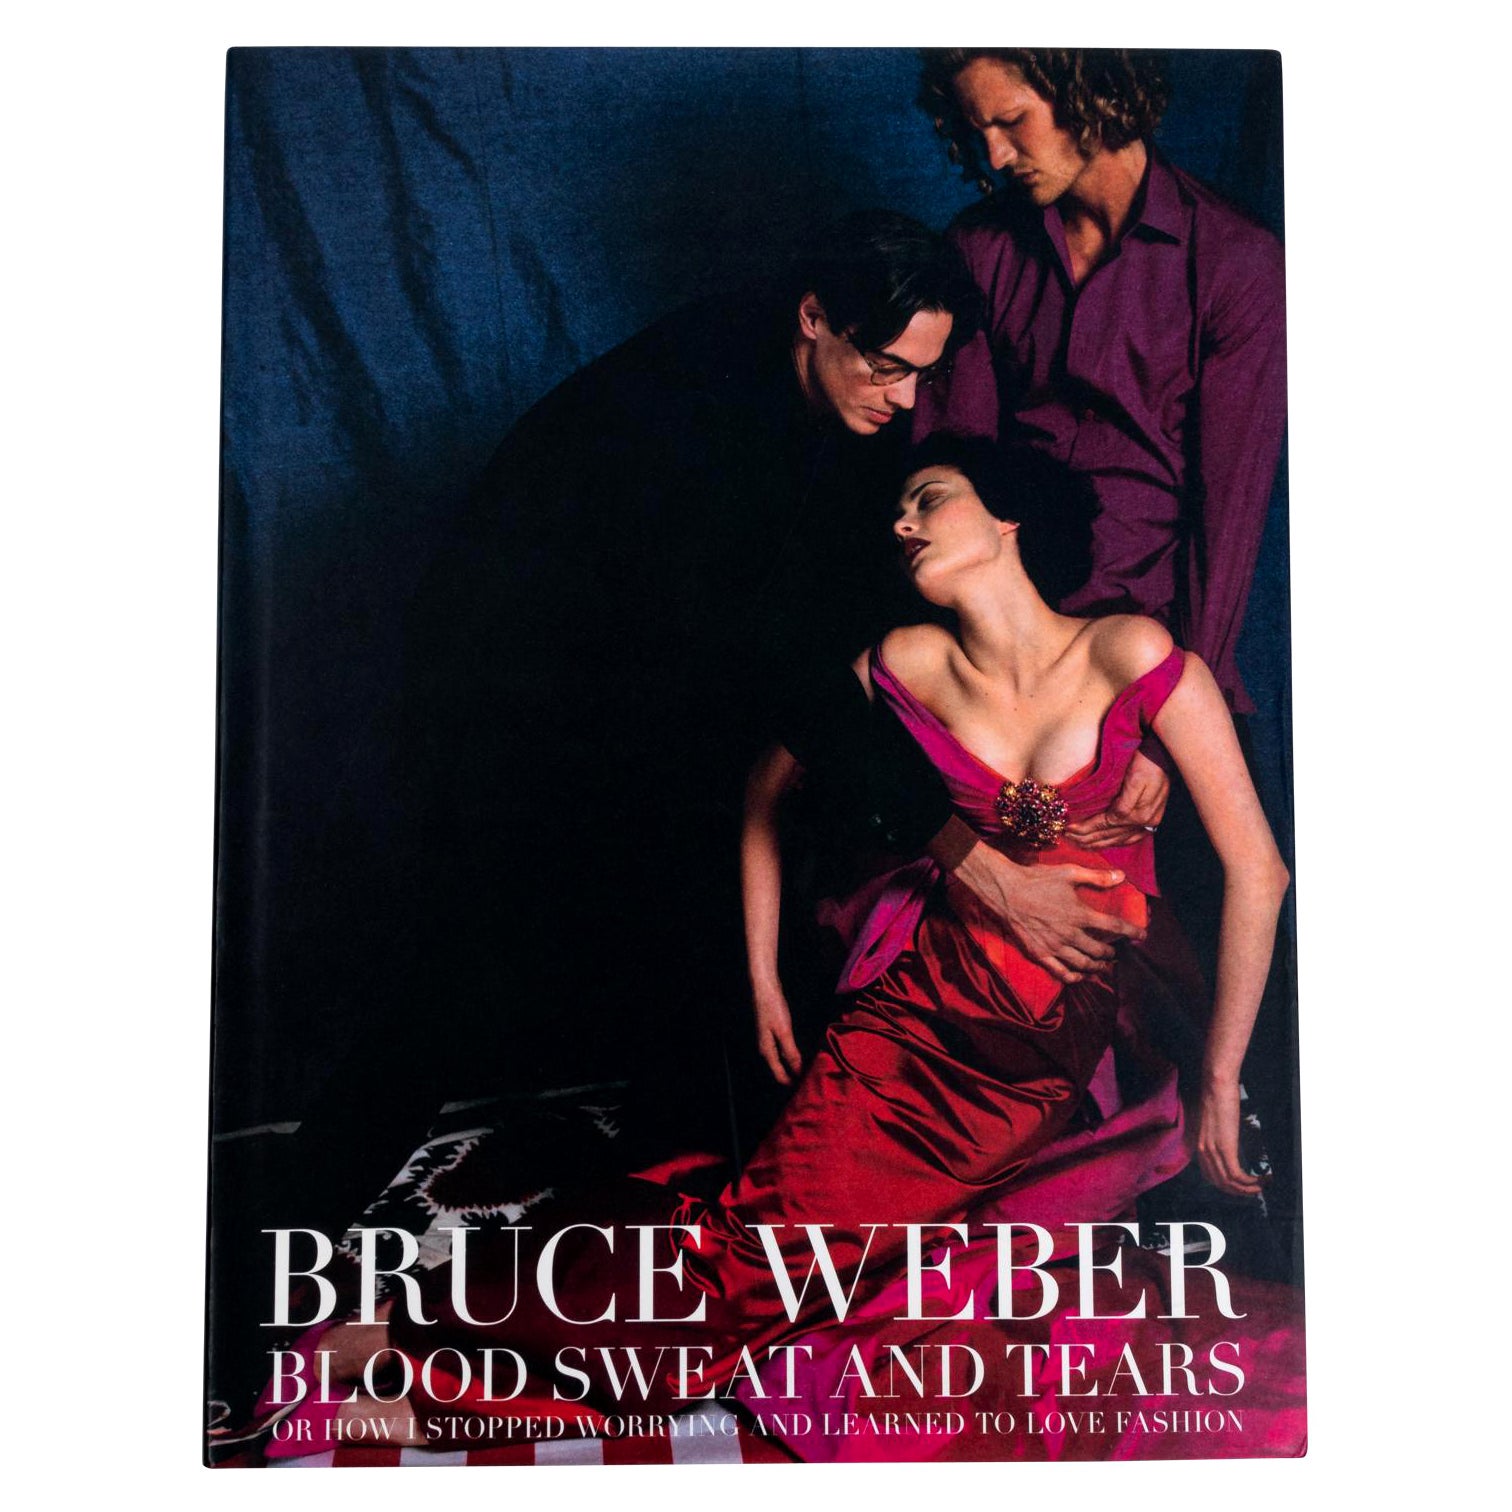 Bruce Weber "Blood Sweat and Tears" Signed First Edition Hardcover Book